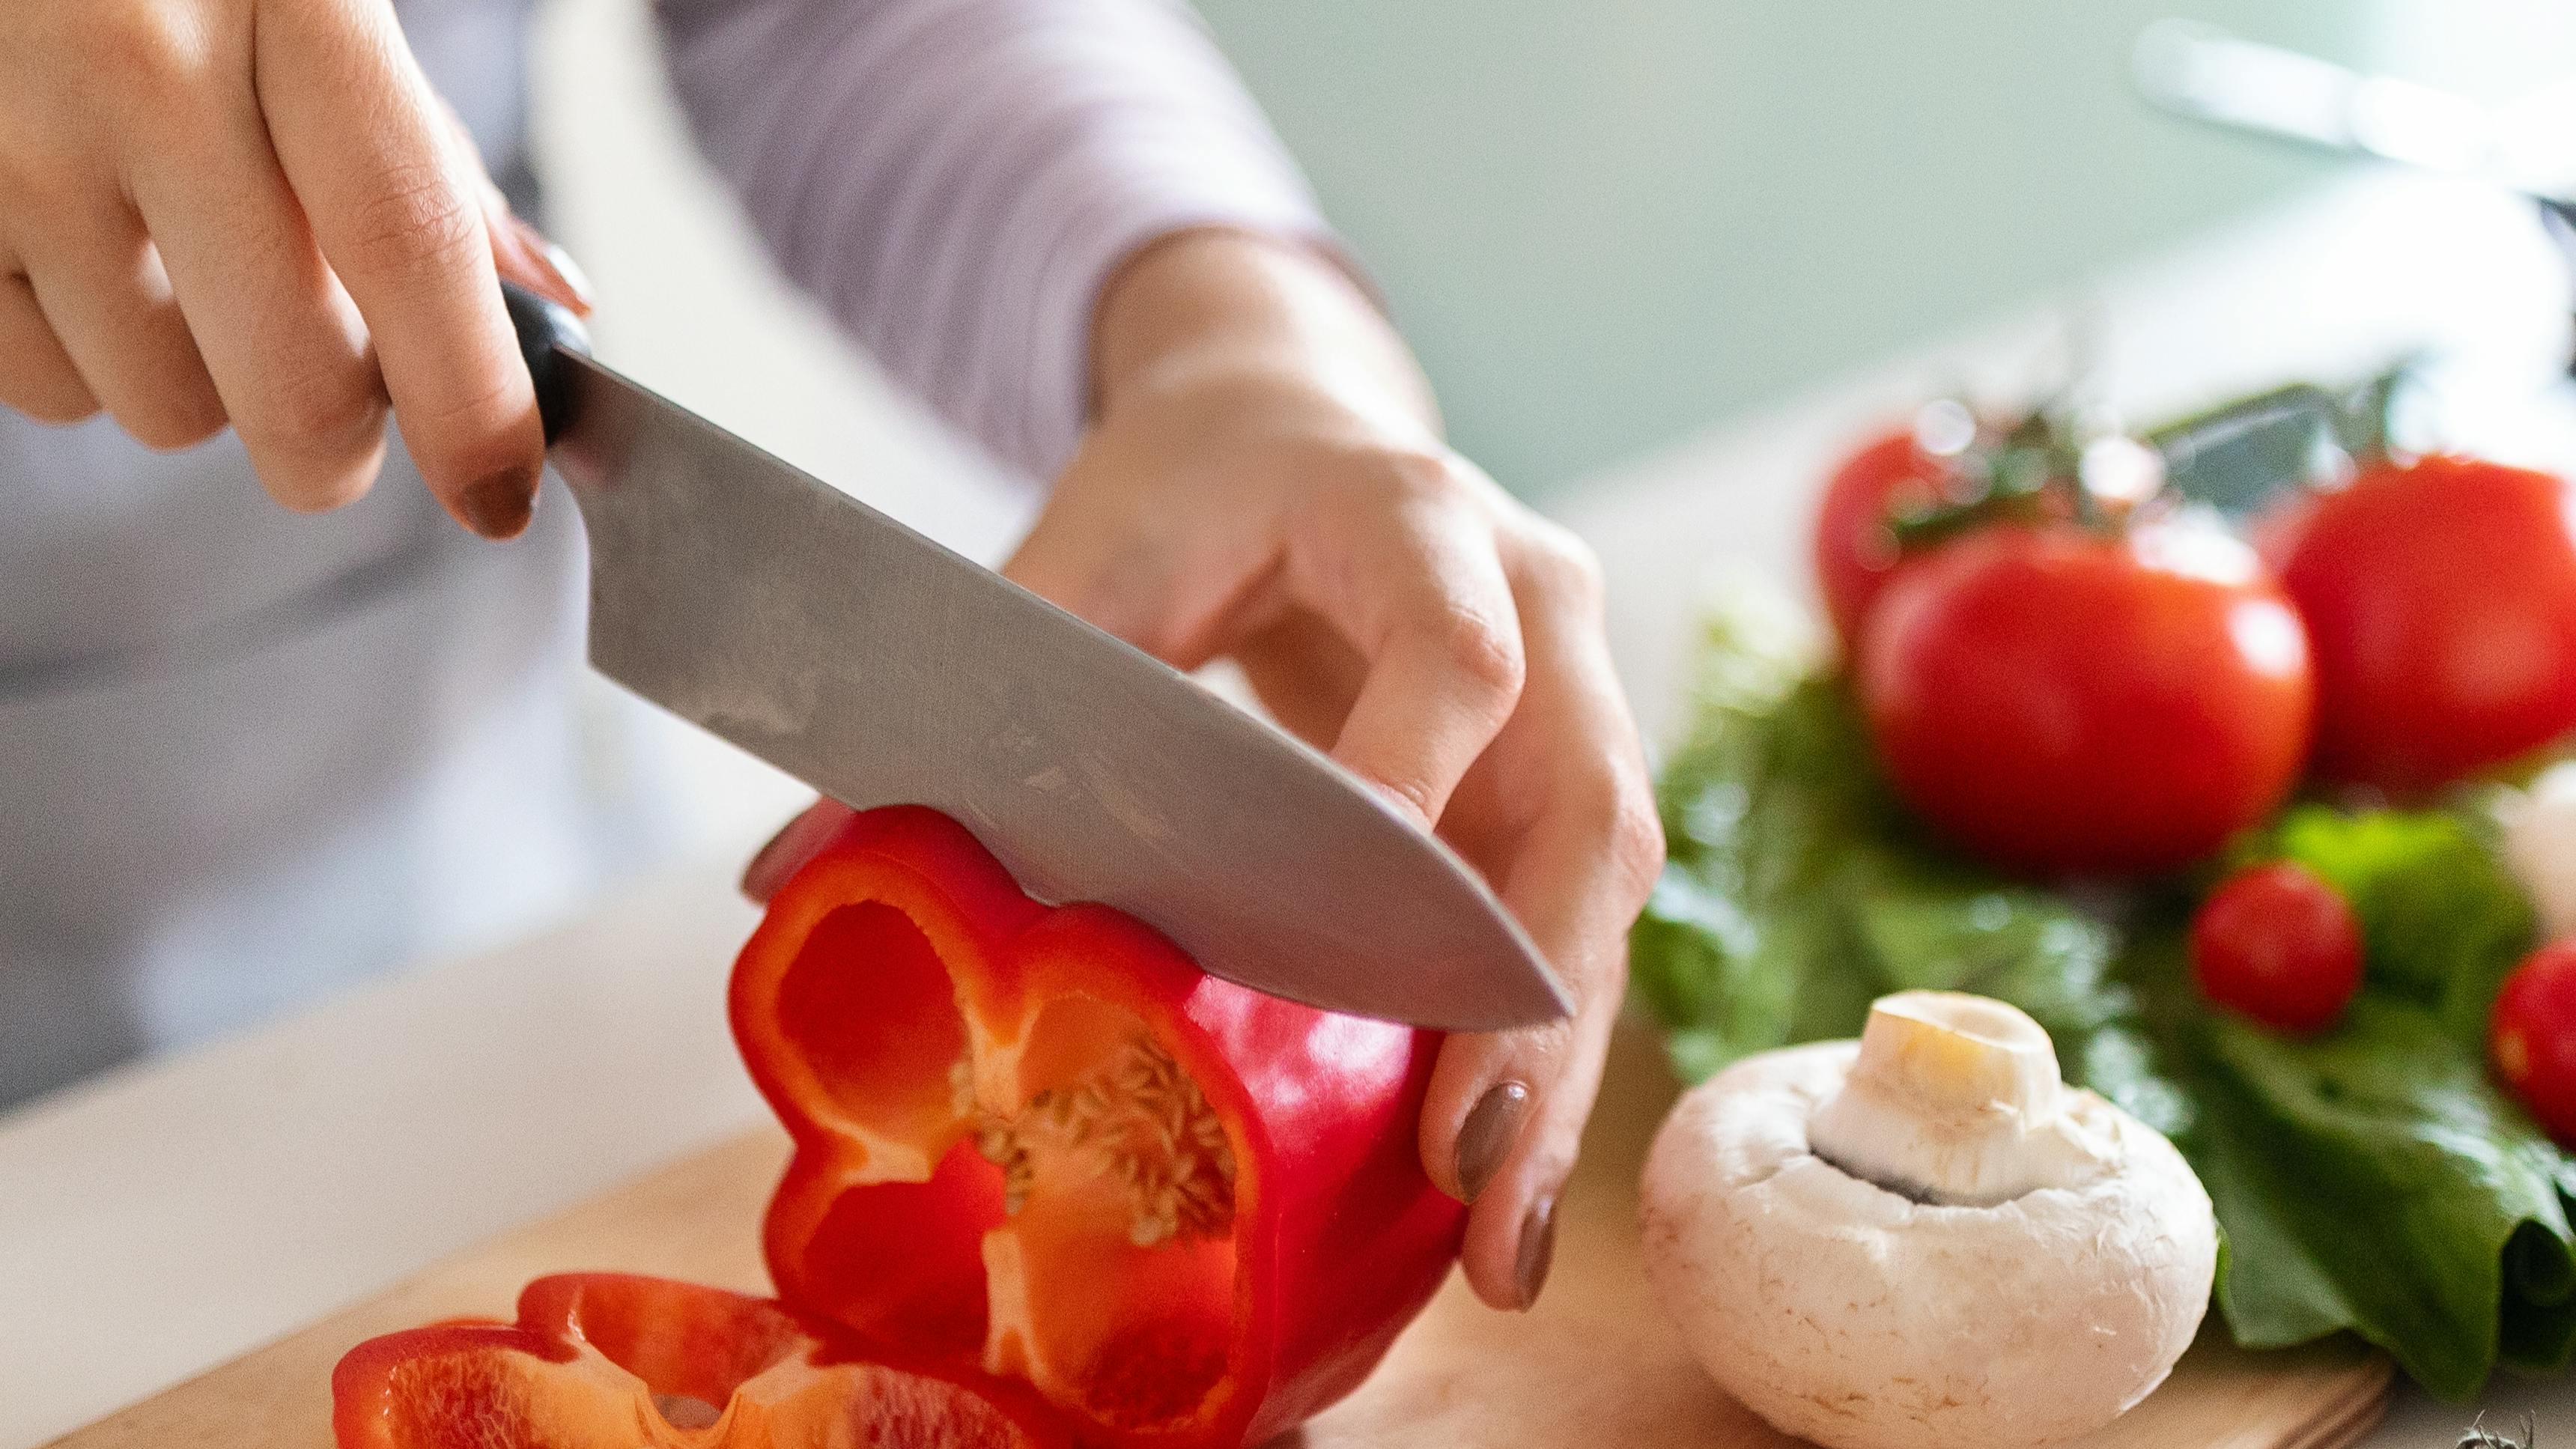 Close up of a woman's hands as she cuts peppers with a kitchen knife.